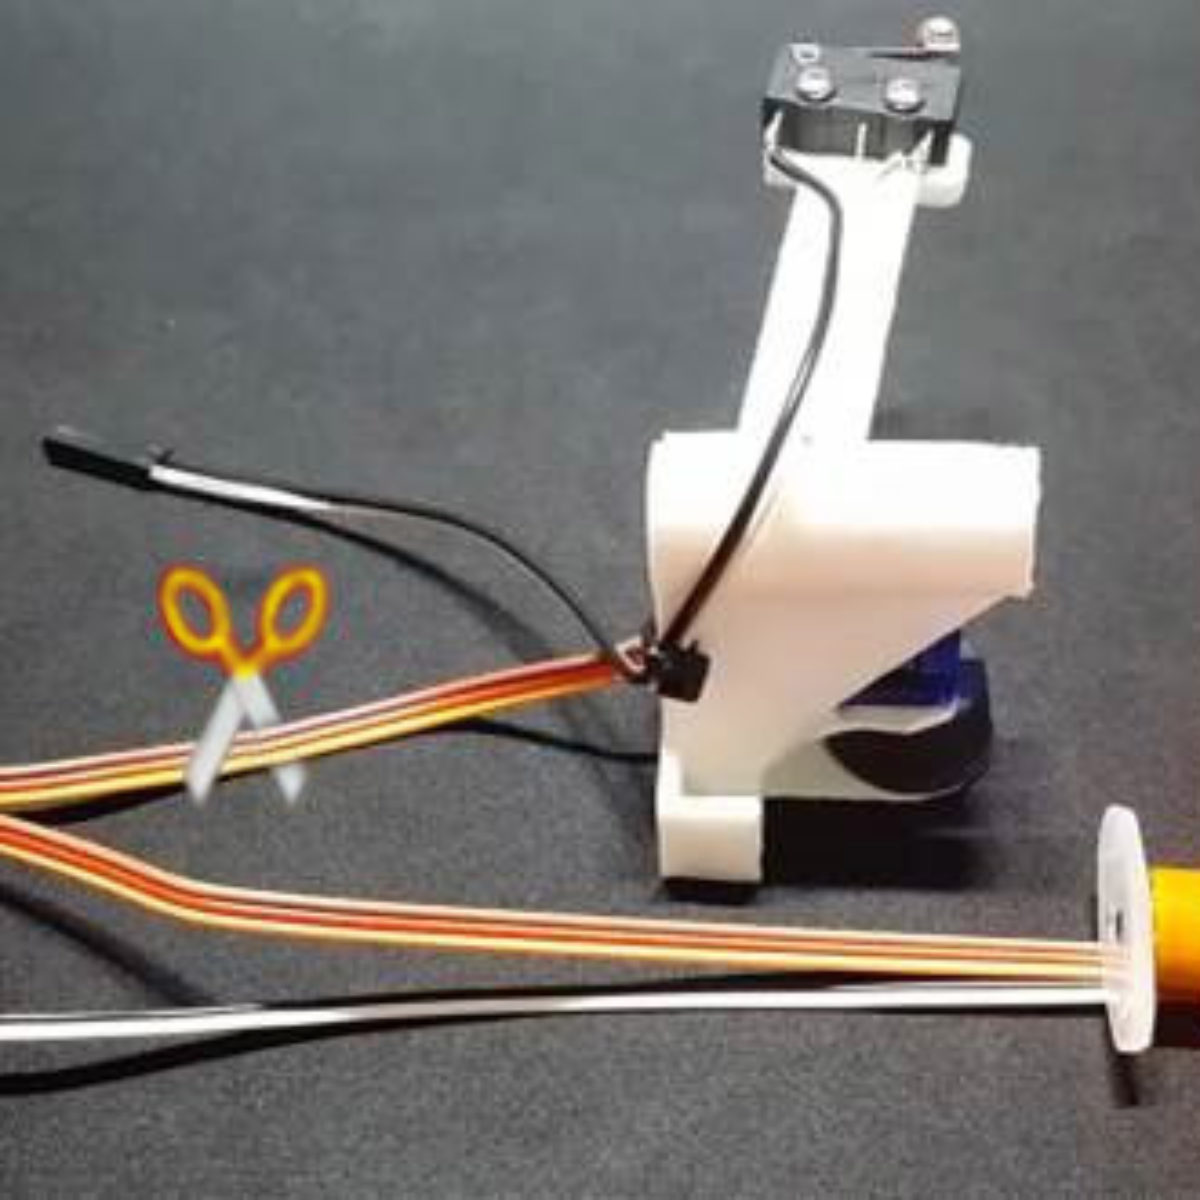 ANTCLABS BLTouch Auto Bed Leveling Sensor/to be a Premium 3D Printer with 2M Extension Cable Set 